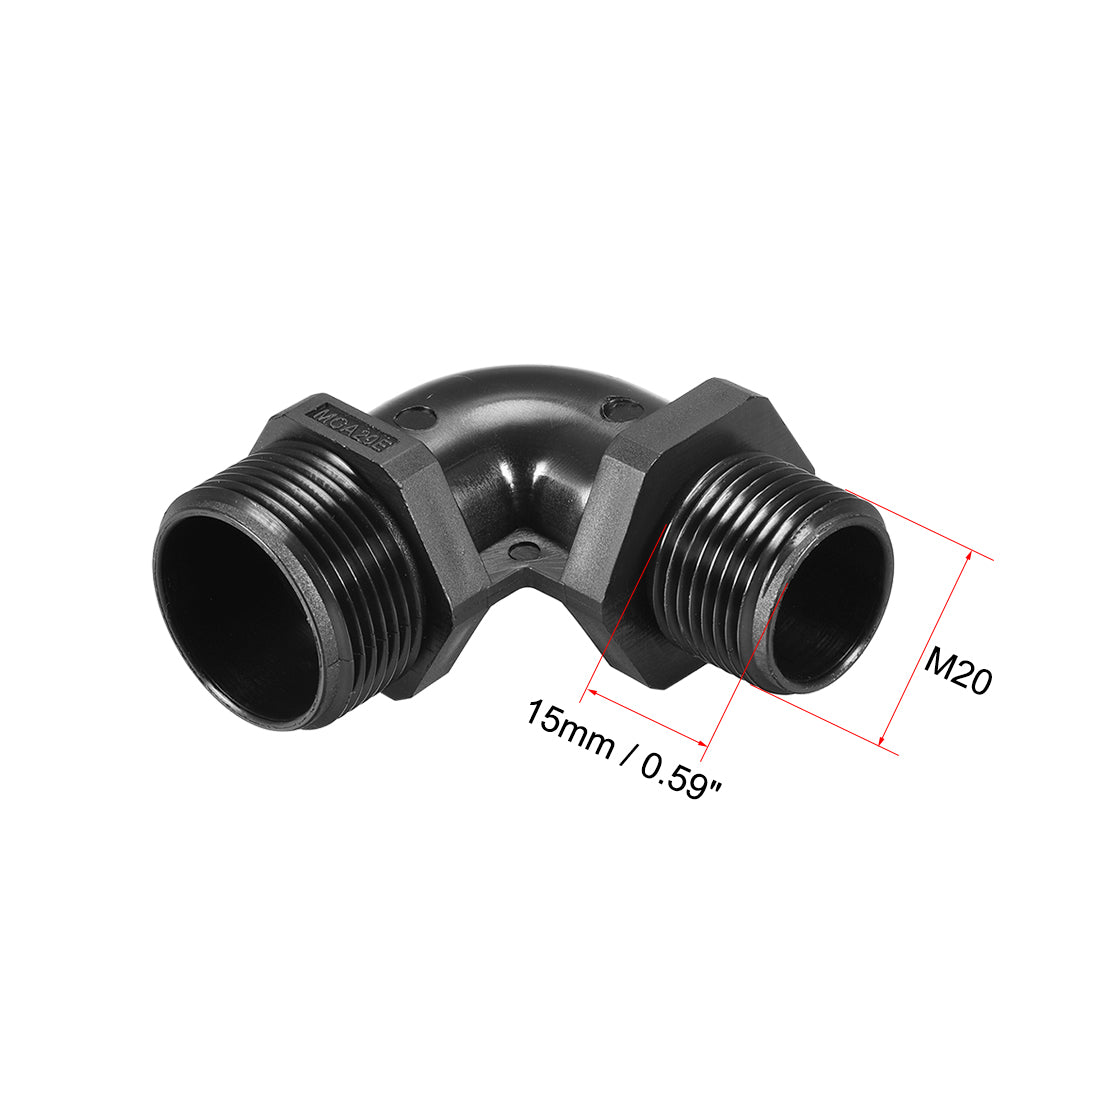 Uxcell Uxcell M20 Cable Gland , 90 Degree Waterproof IP68 Nylon Joint Adjustable Locknut for 6mm-11mm Dia Cable Wire , 2 Pcs